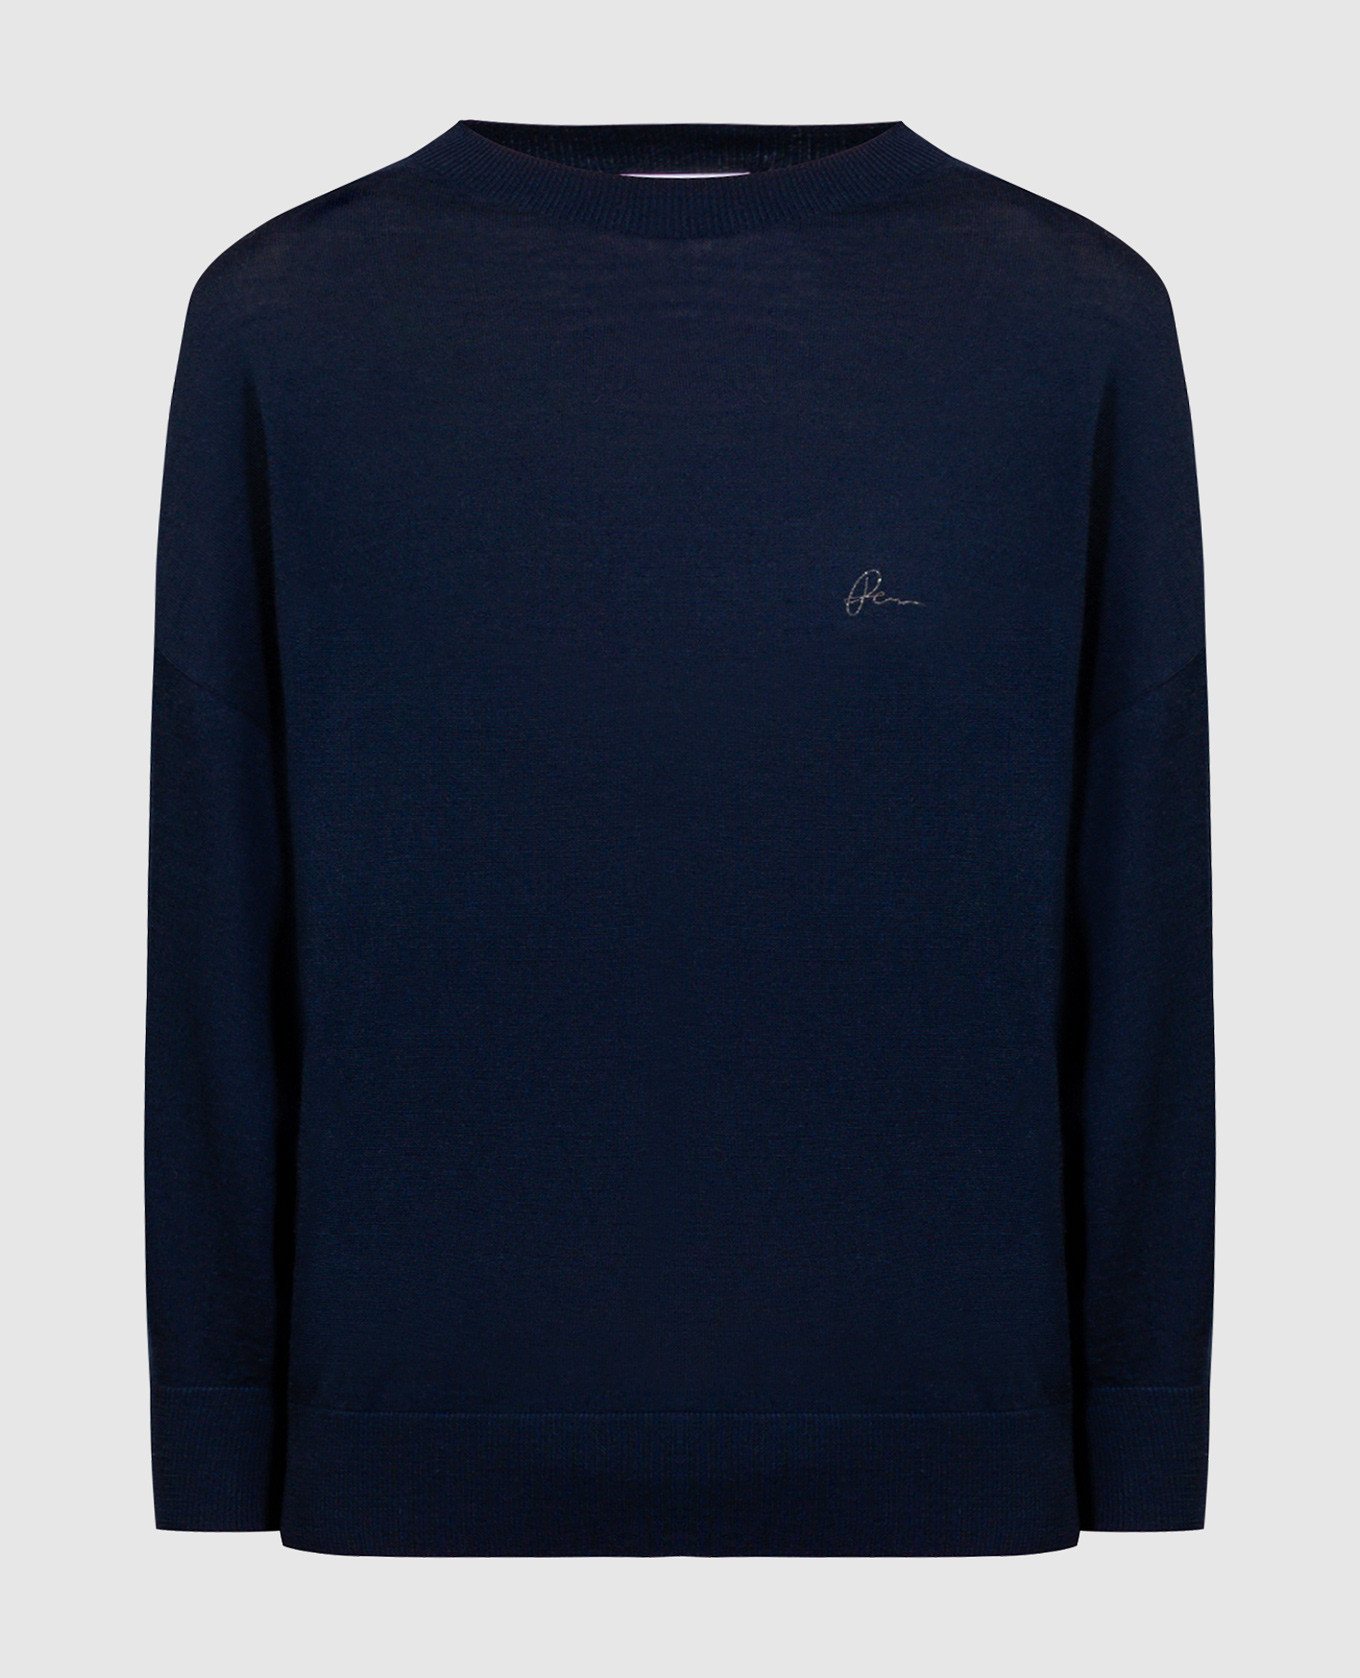 Blue wool jumper with logo